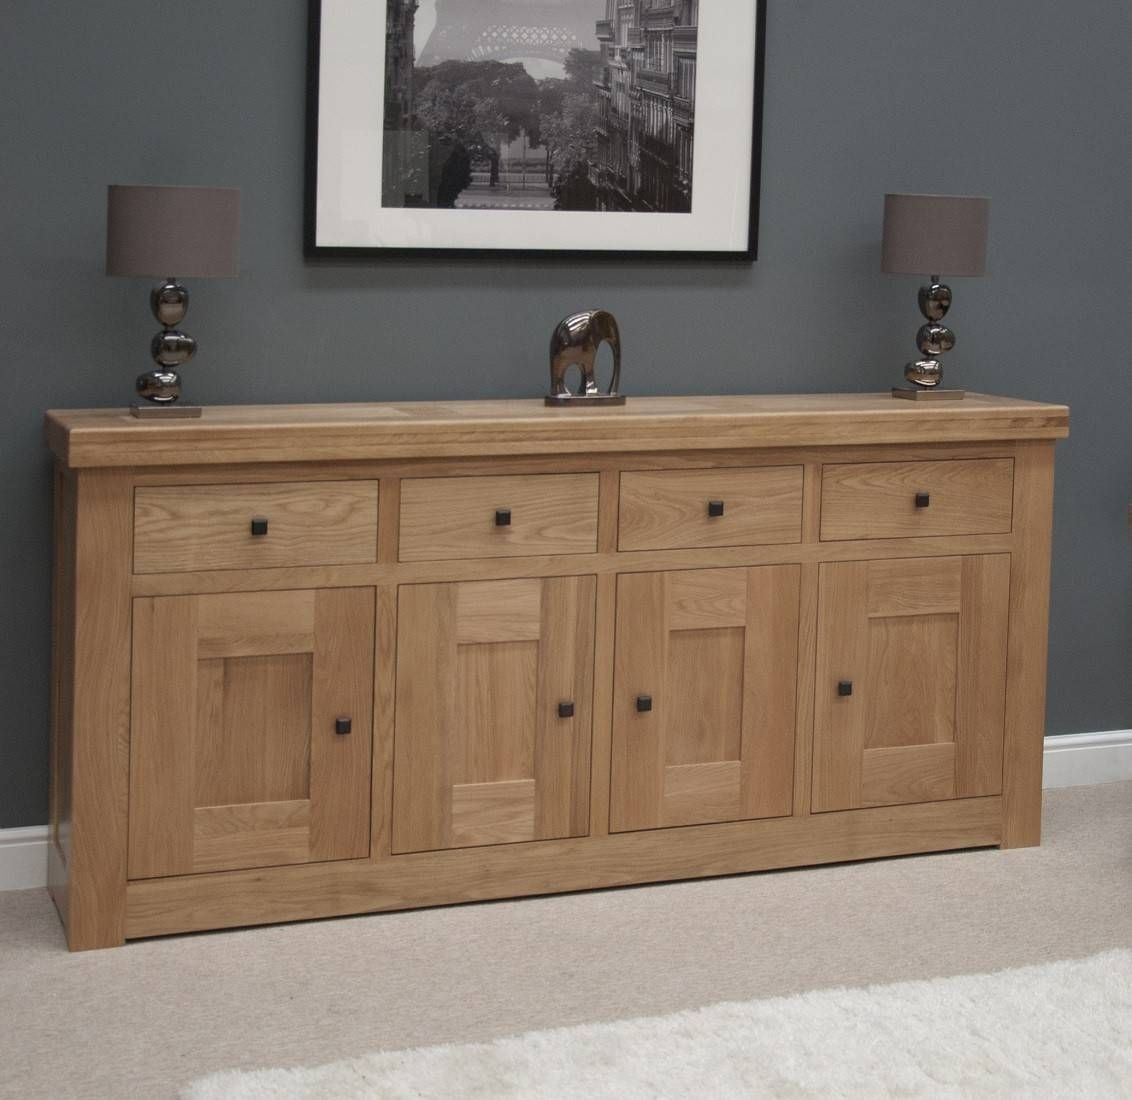 French Bordeaux Oak Extra Large 4 Door Sideboard | Oak Furniture Uk With Most Up To Date Large Sideboards (View 2 of 15)